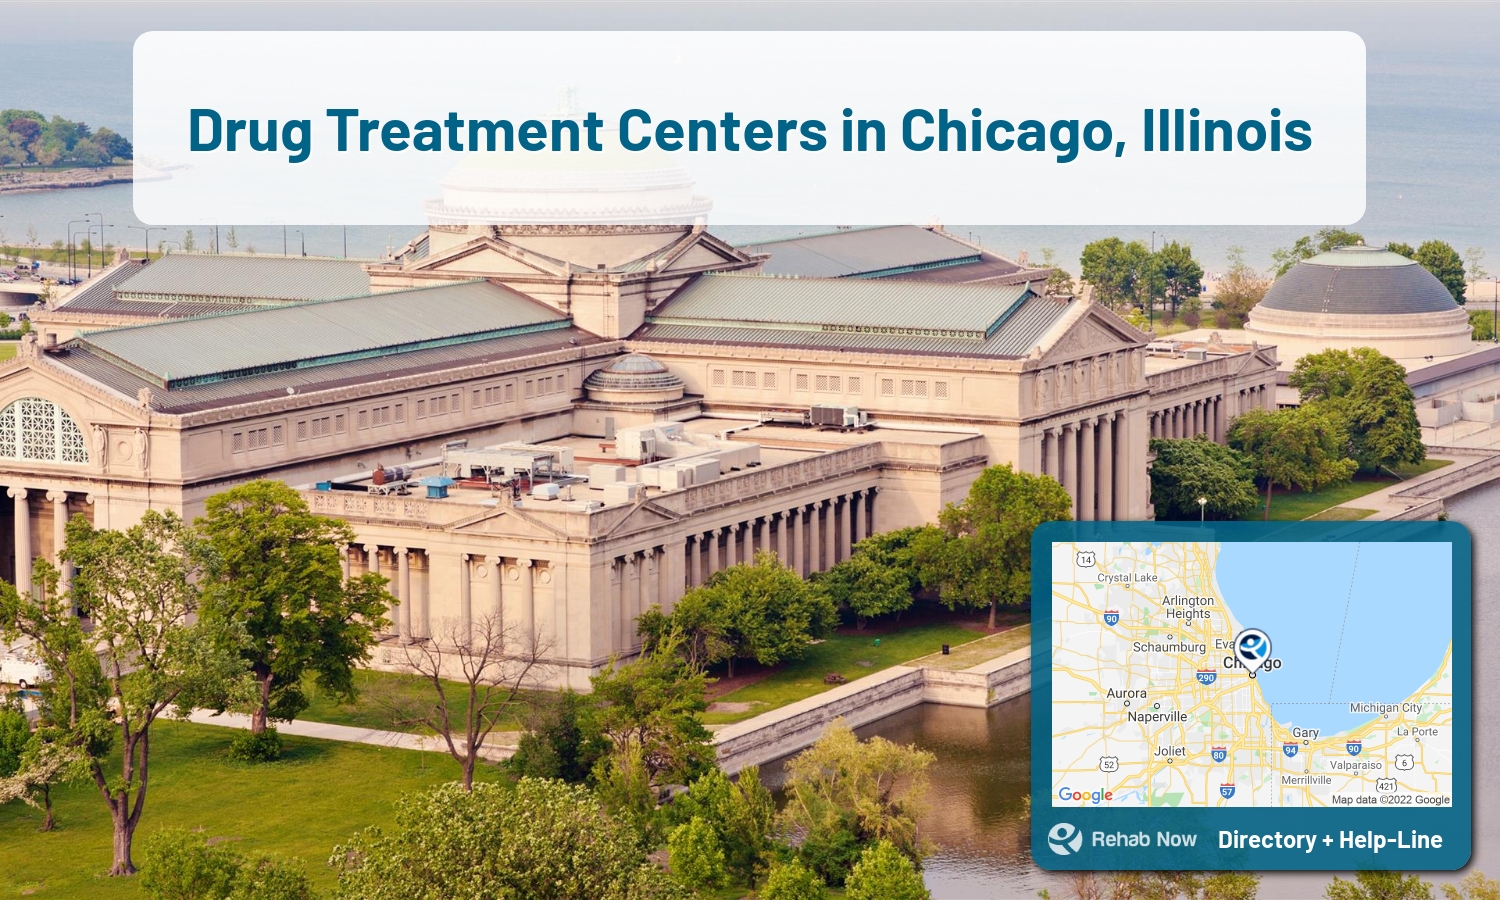 Chicago, IL Treatment Centers. Find drug rehab in Chicago, Illinois, or detox and treatment programs. Get the right help now!